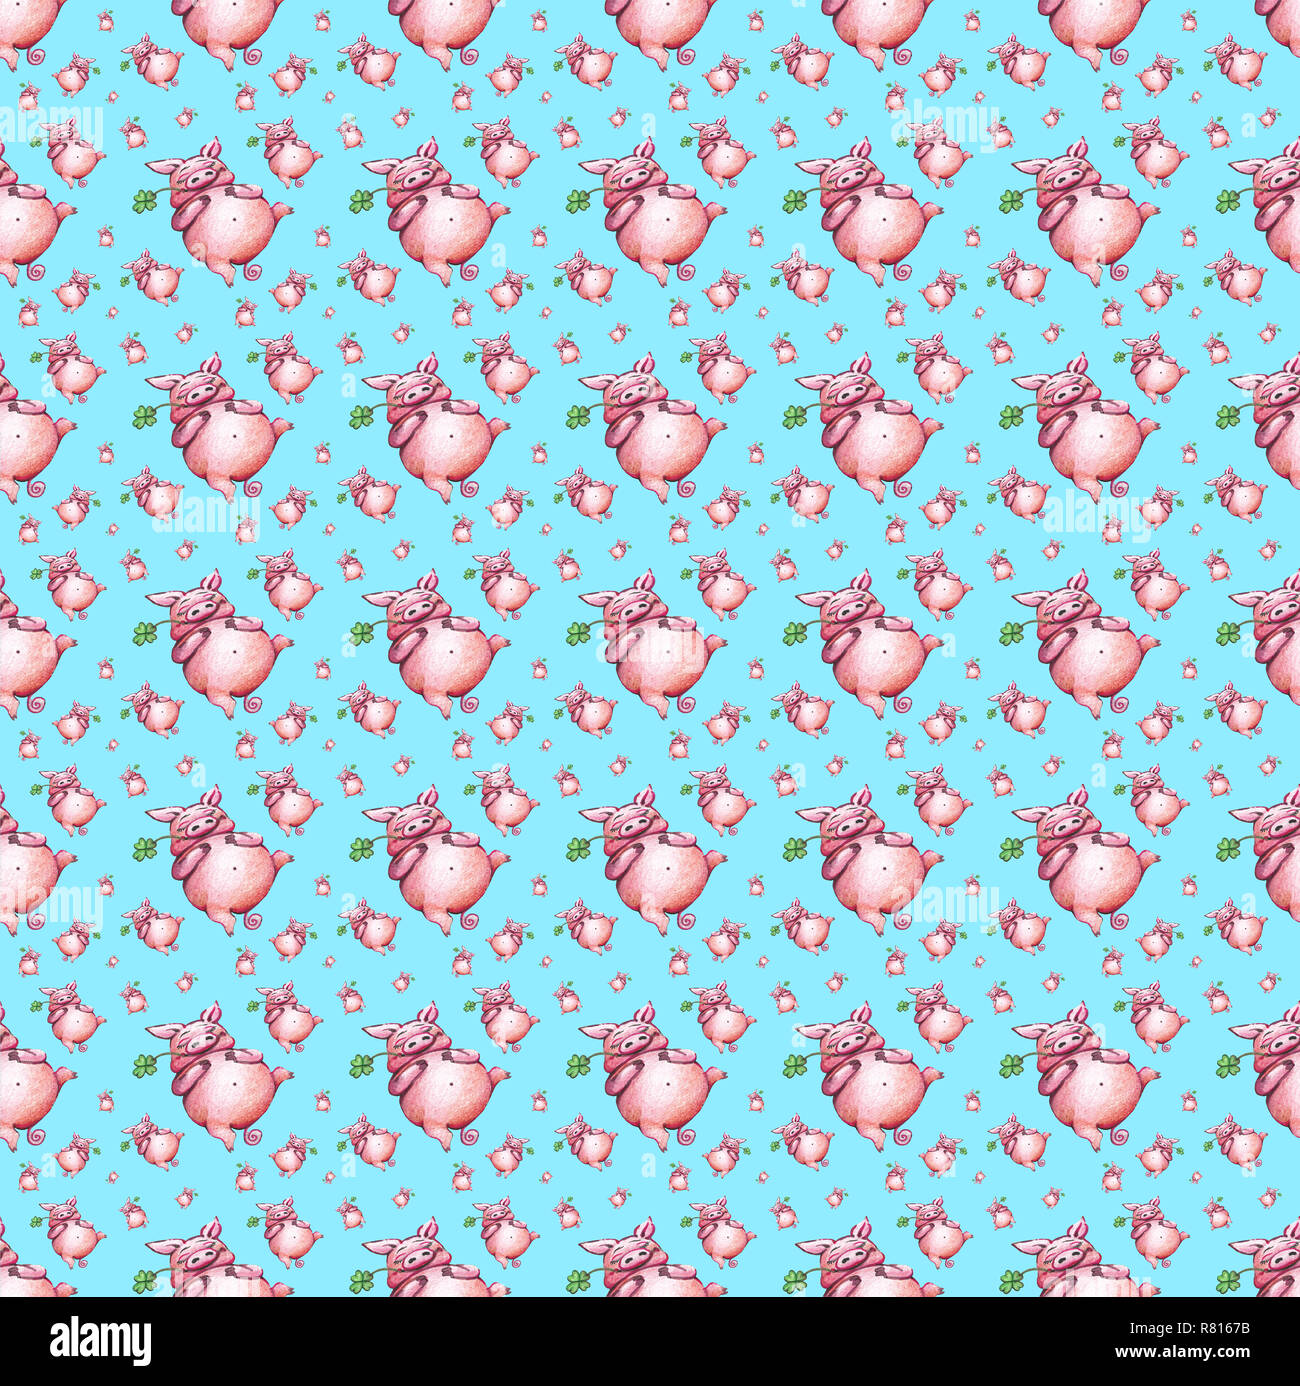 Wallpaper, wrapping paper, seamless pattern, lucky pigs with four-leaf clover on light blue background, Germany Stock Photo